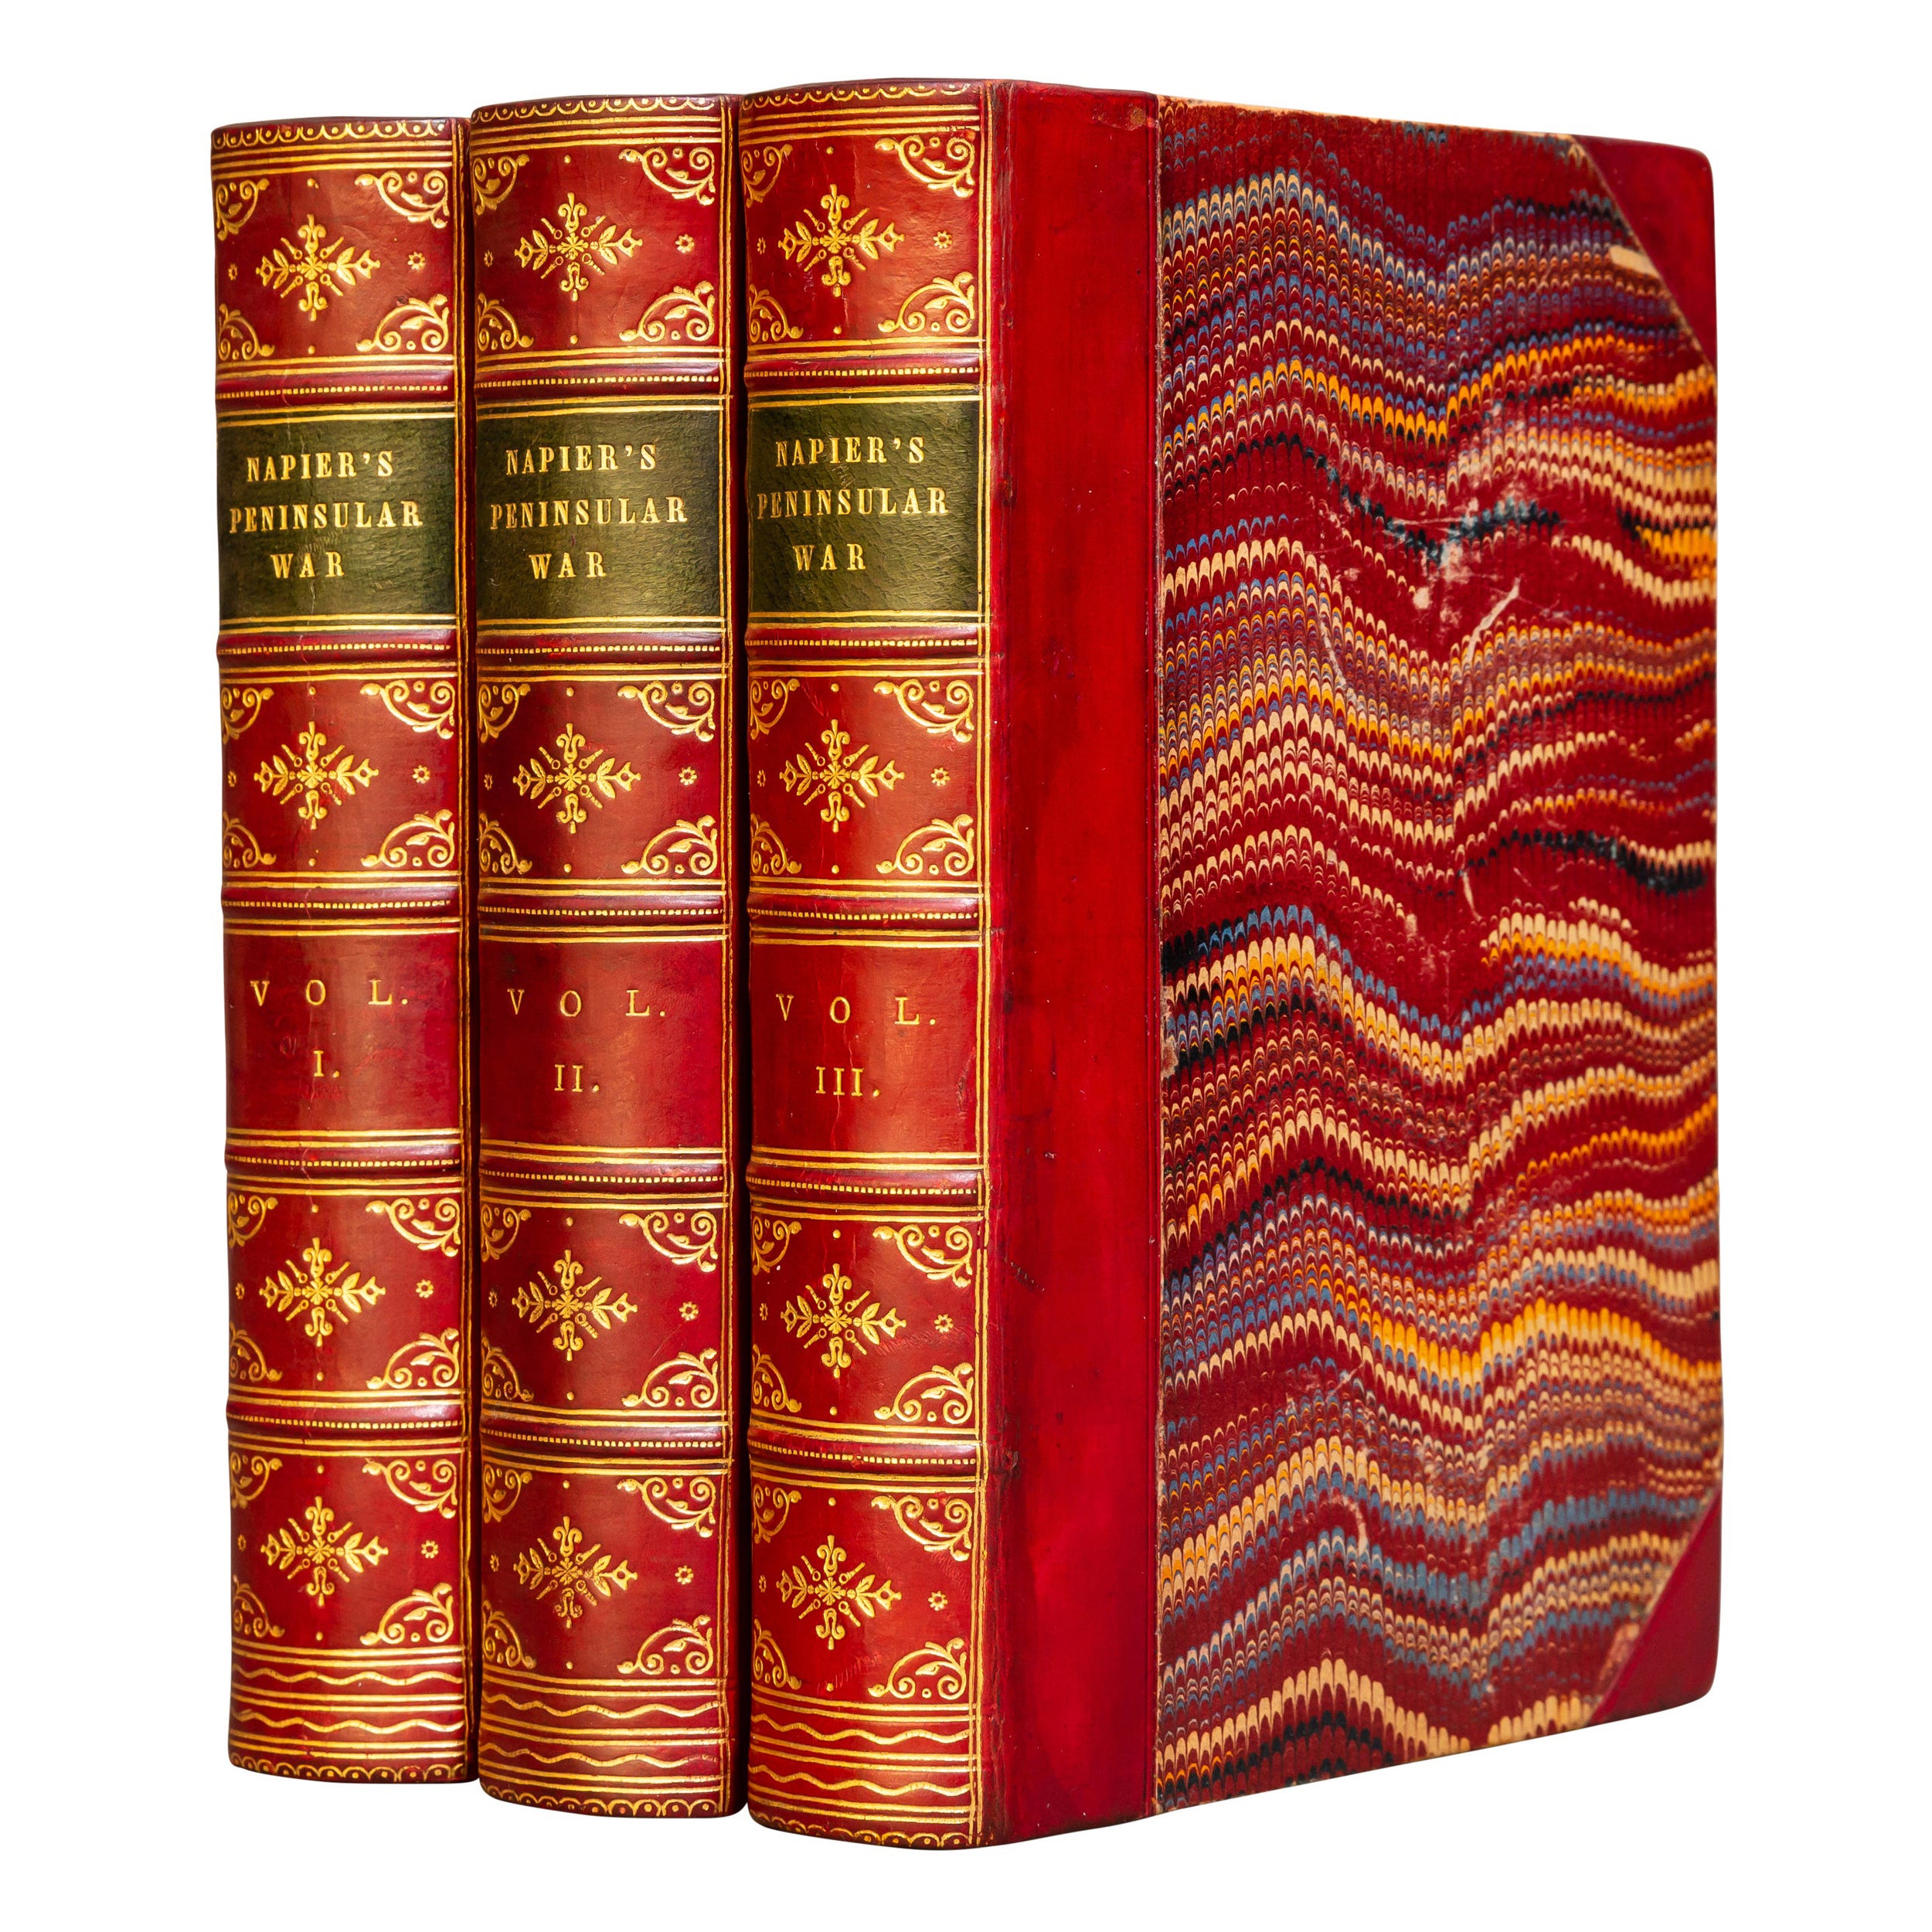 'Book Sets' 3 Volumes. W. F. P. Napier, History of the Peninsular War For Sale